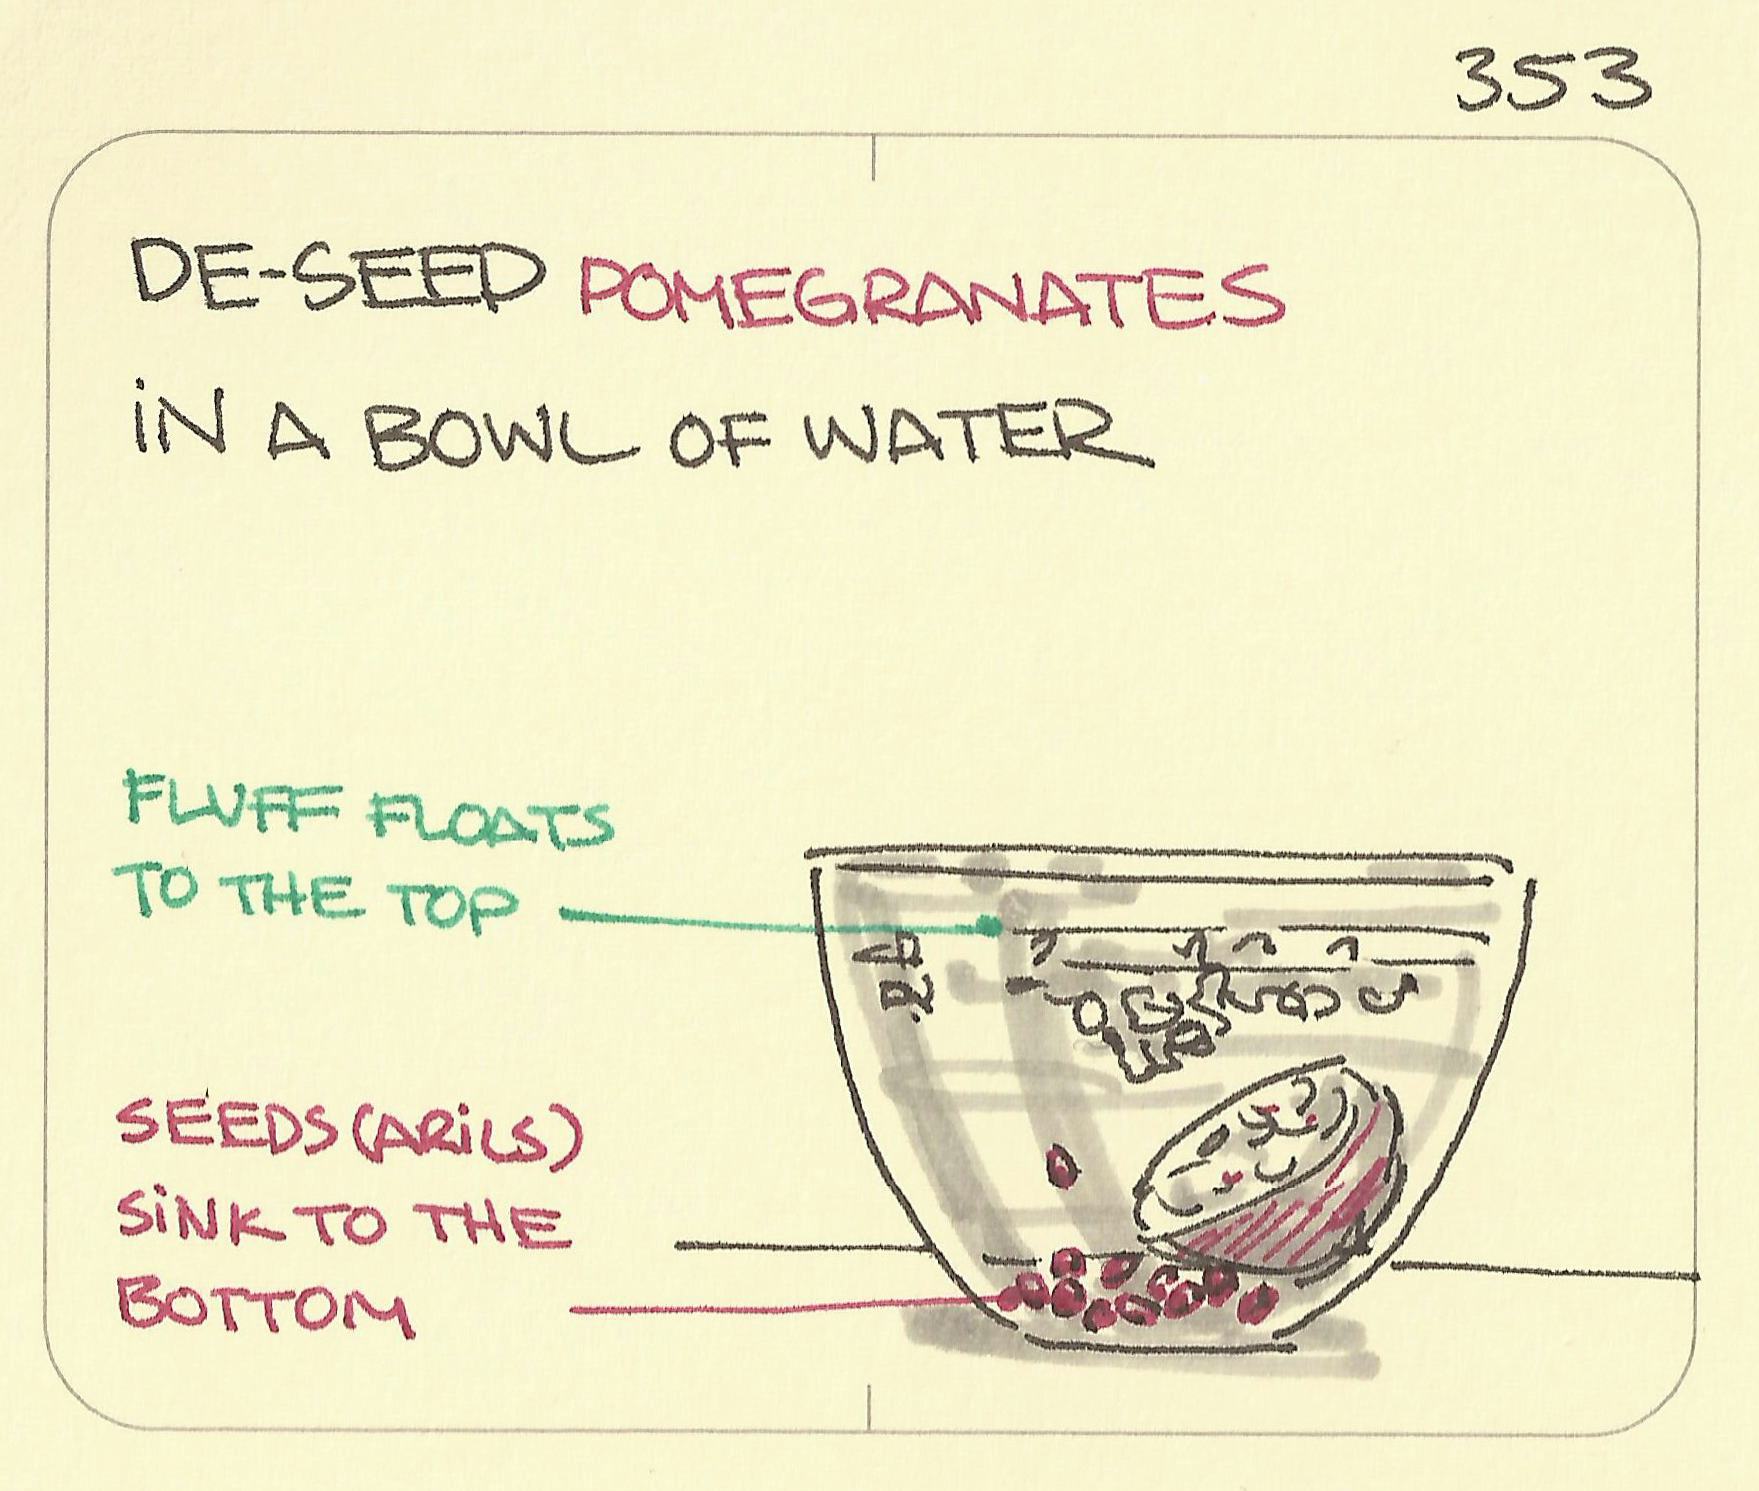 De-seed pomegranates in a bowl of water - Sketchplanations